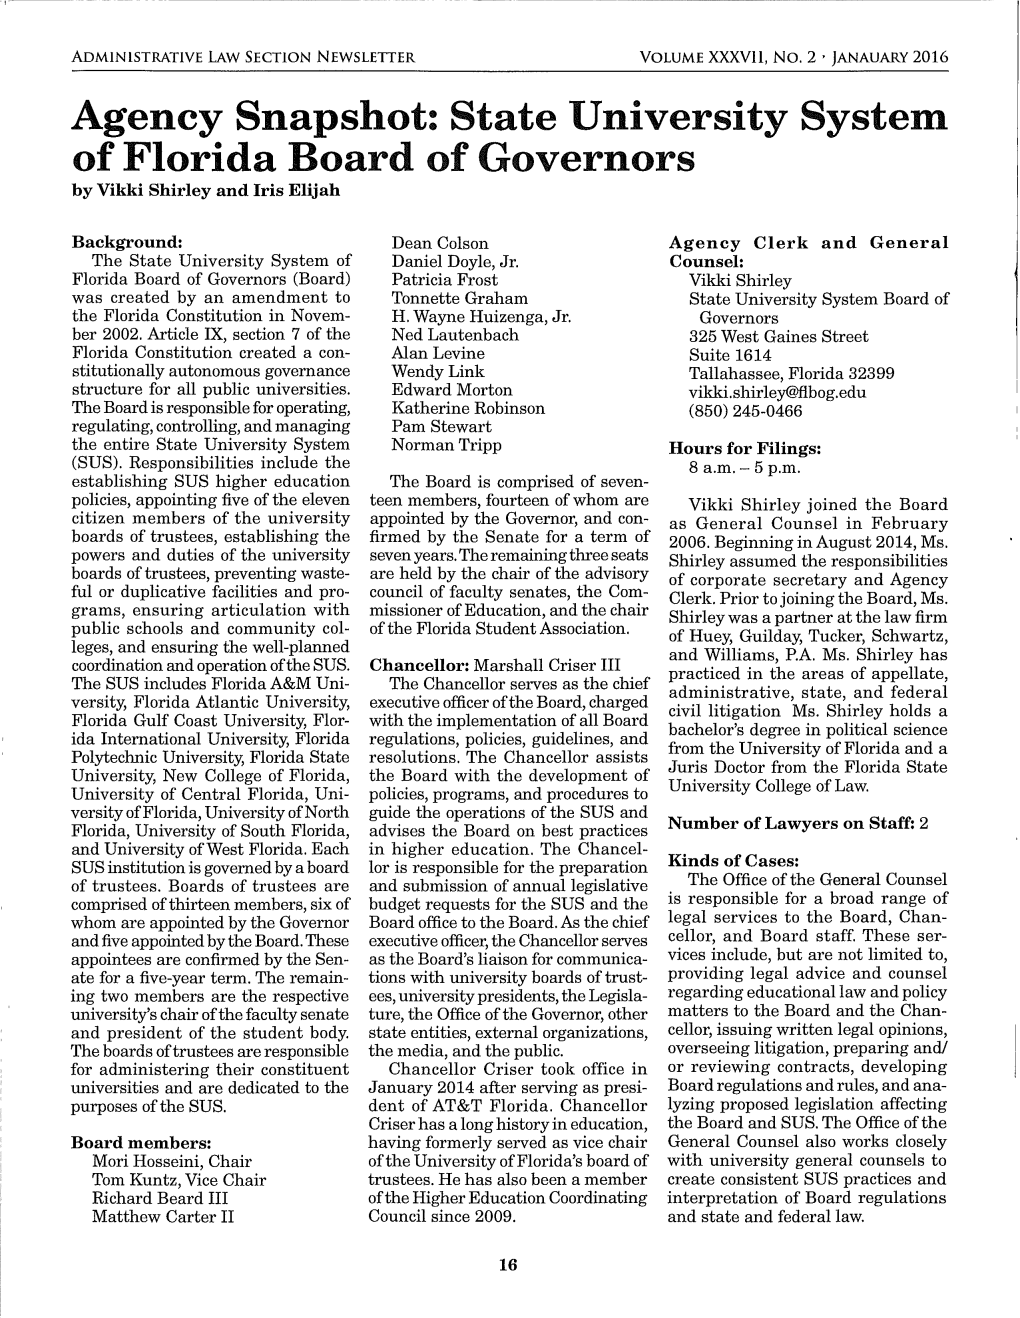 State University System of Florida Board of Governors by Vikki Shirley and Iris Elijah